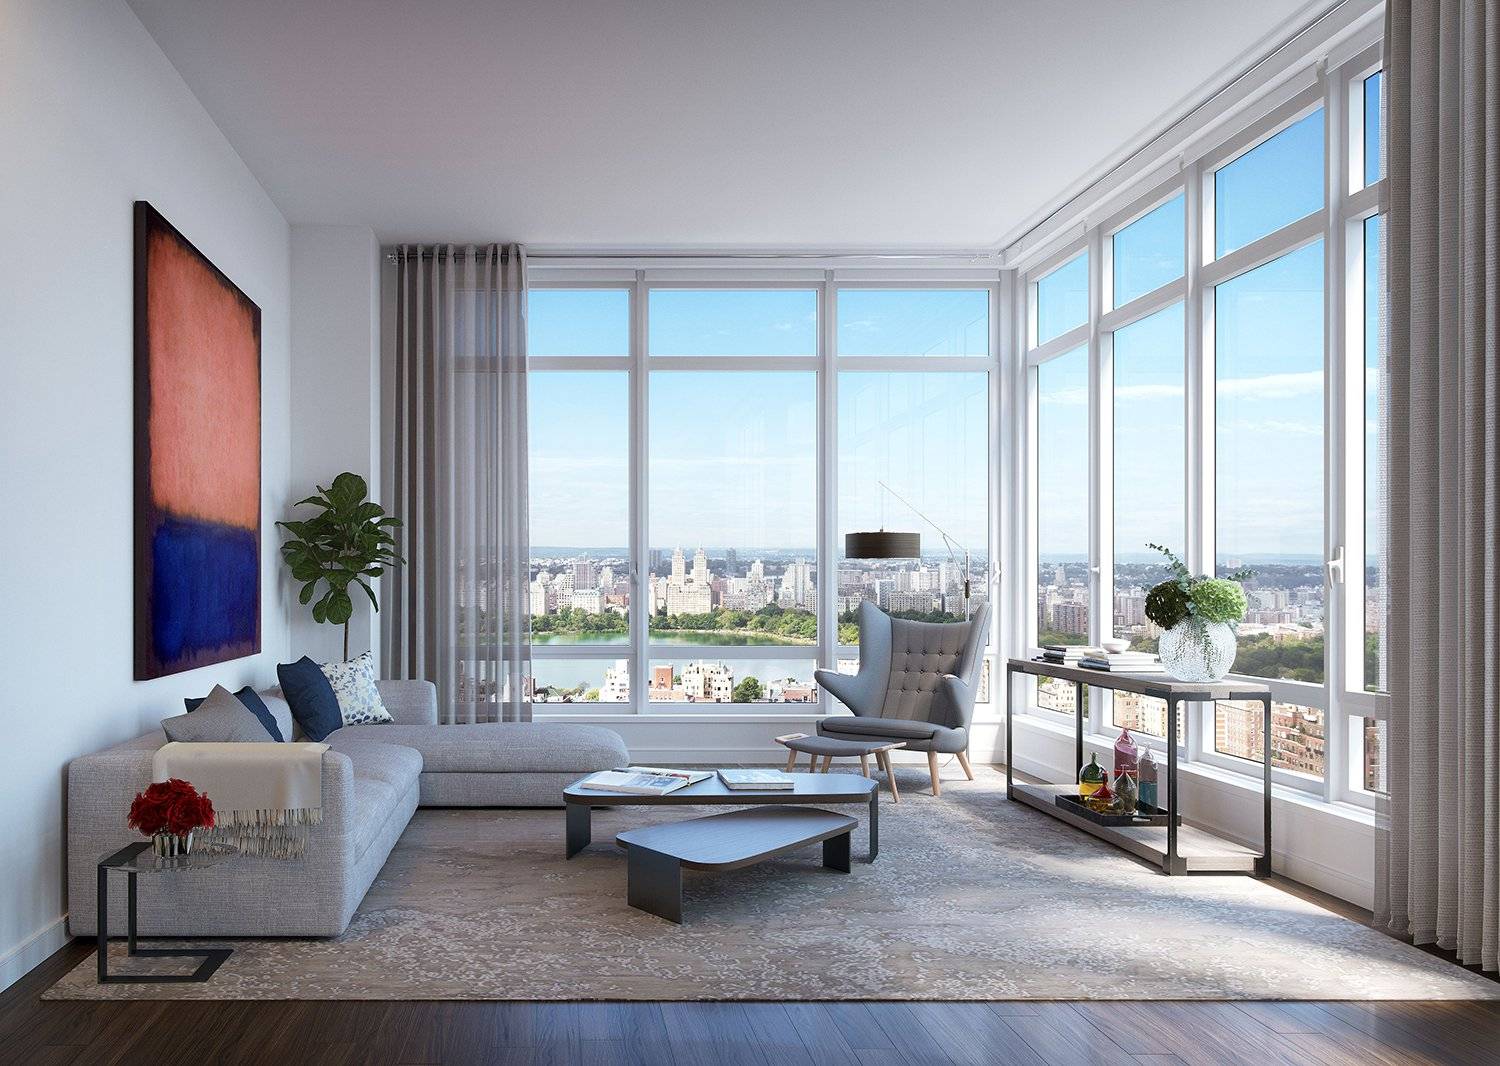 ★★★★★NO FEE / 1 FREE MONTH RENT ULTRA LUXURY GRAND UES RESIDENCE 1Bed /1  Bath <> Highest Quality of Finishes and Level of Service <> Fantastic Views <> BEST AMENETIES <> GREAT LOCATION